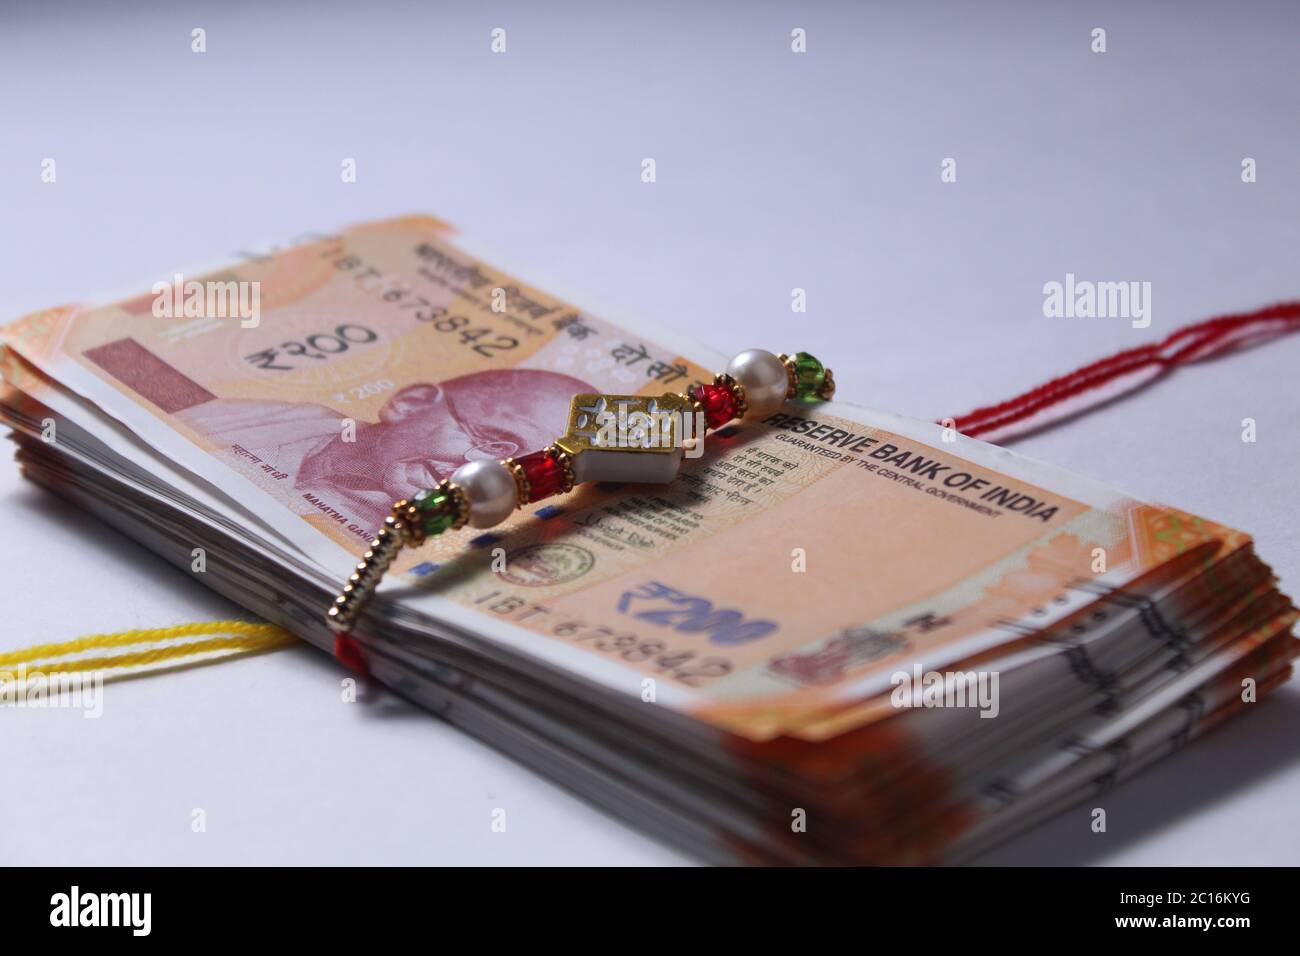 Raksha Bandhan festival Concept showing designer Rakhi or Wrist Band with scattered rice and kumkum,placed with Indian currency over colorful Stock Photo